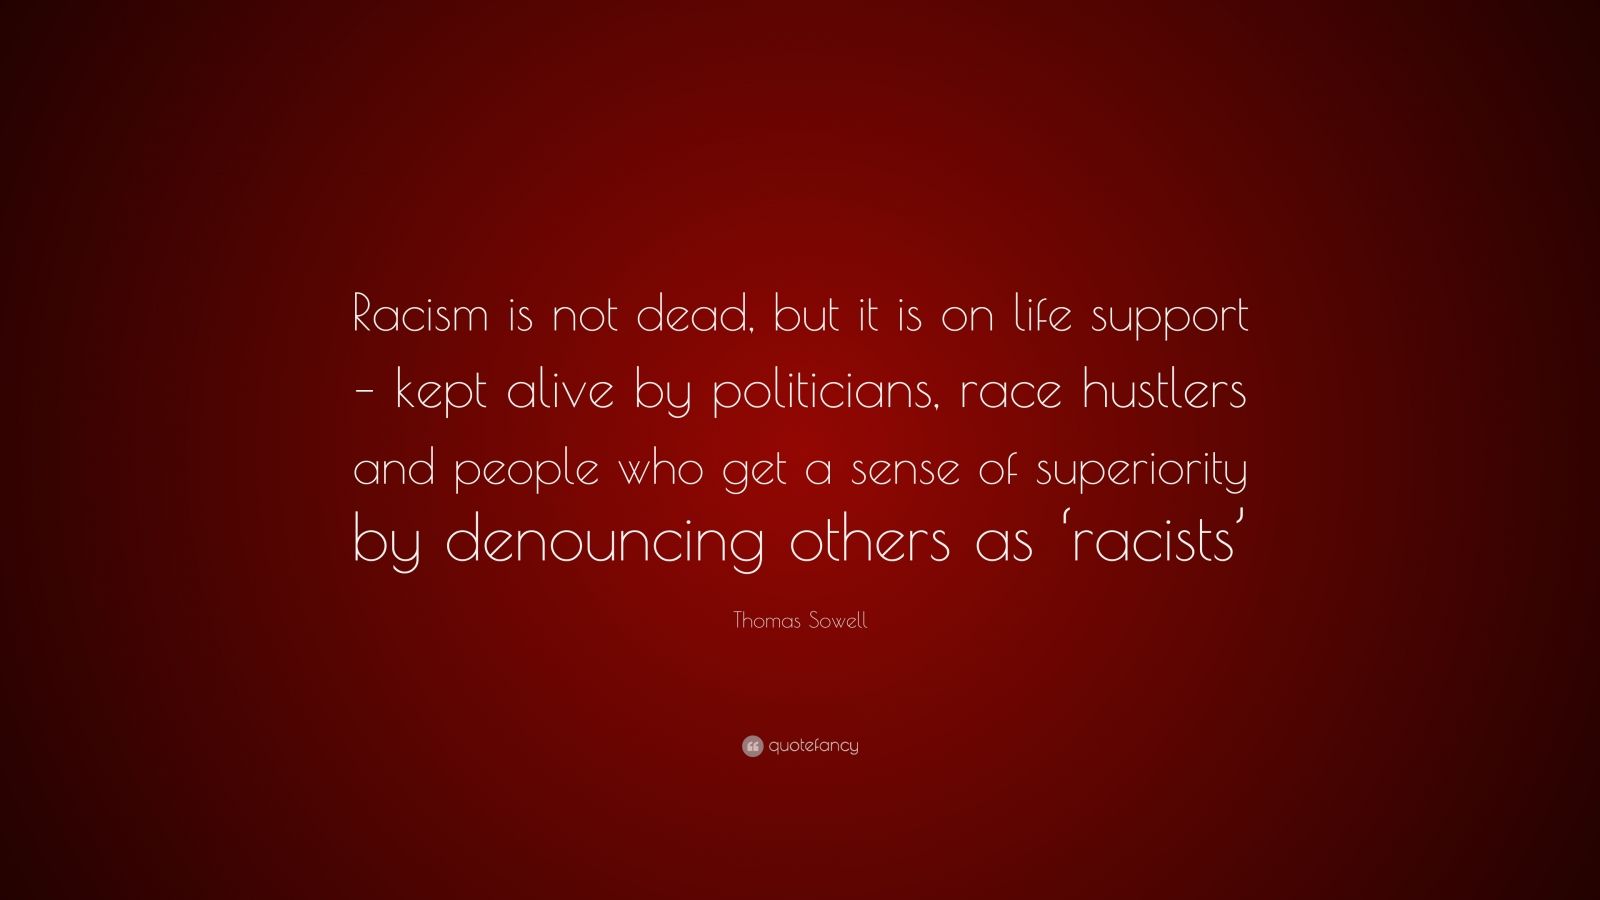 Thomas Sowell Quote: “Racism is not dead, but it is on life support